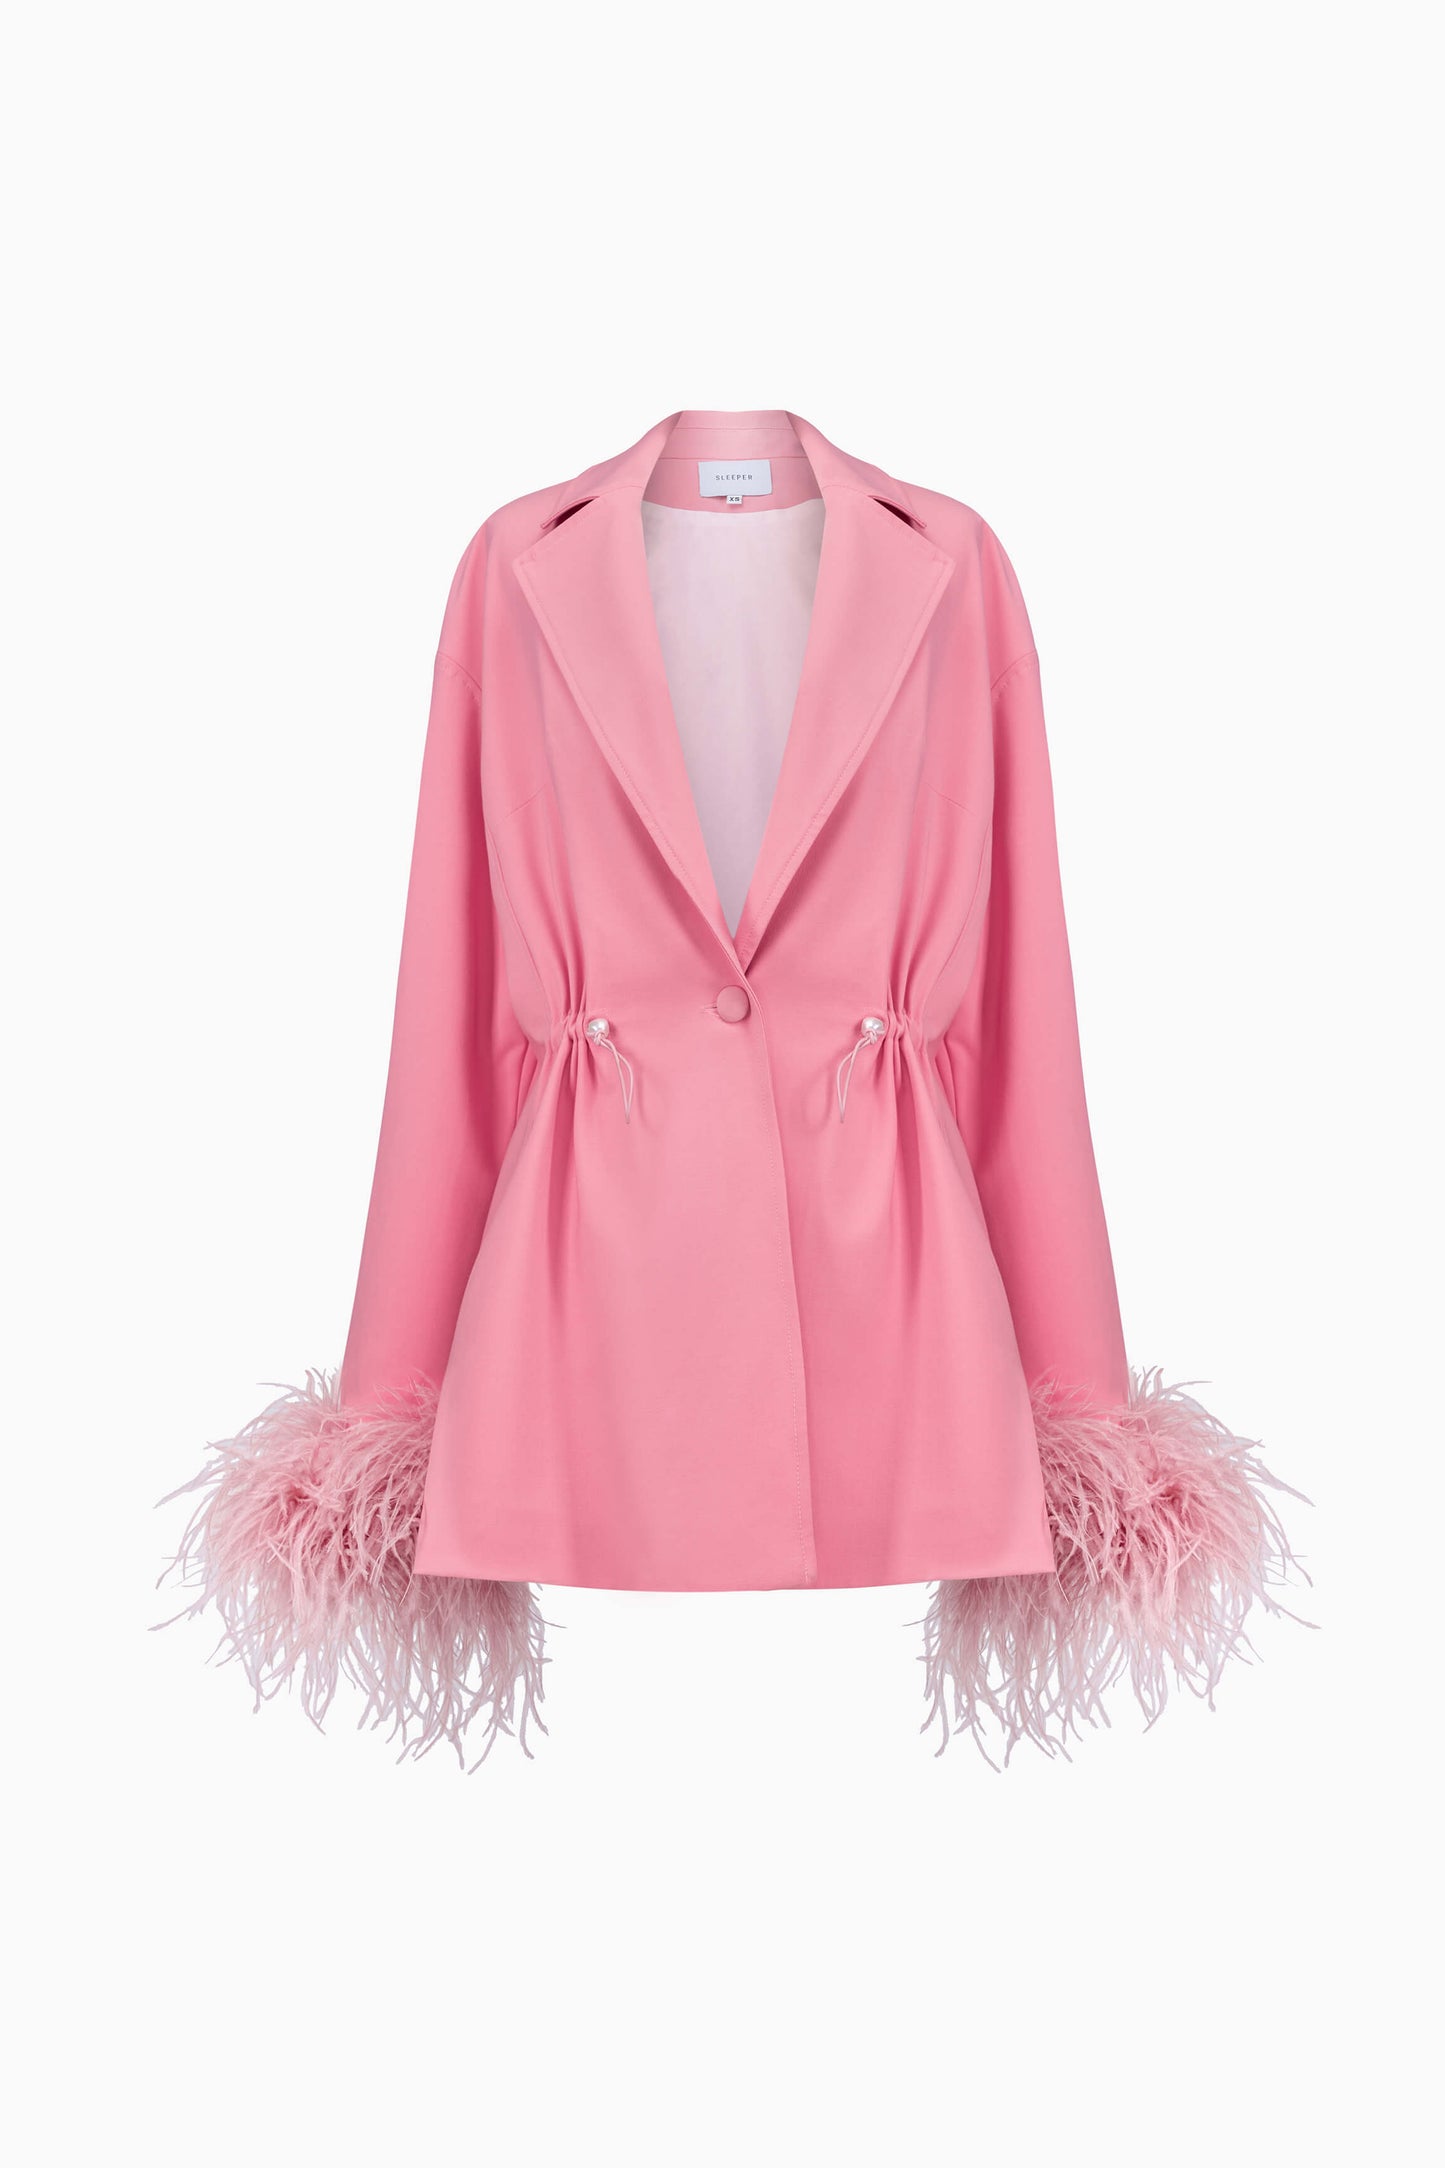 Girl With Pearl Button Blazer with Feathers in Pink